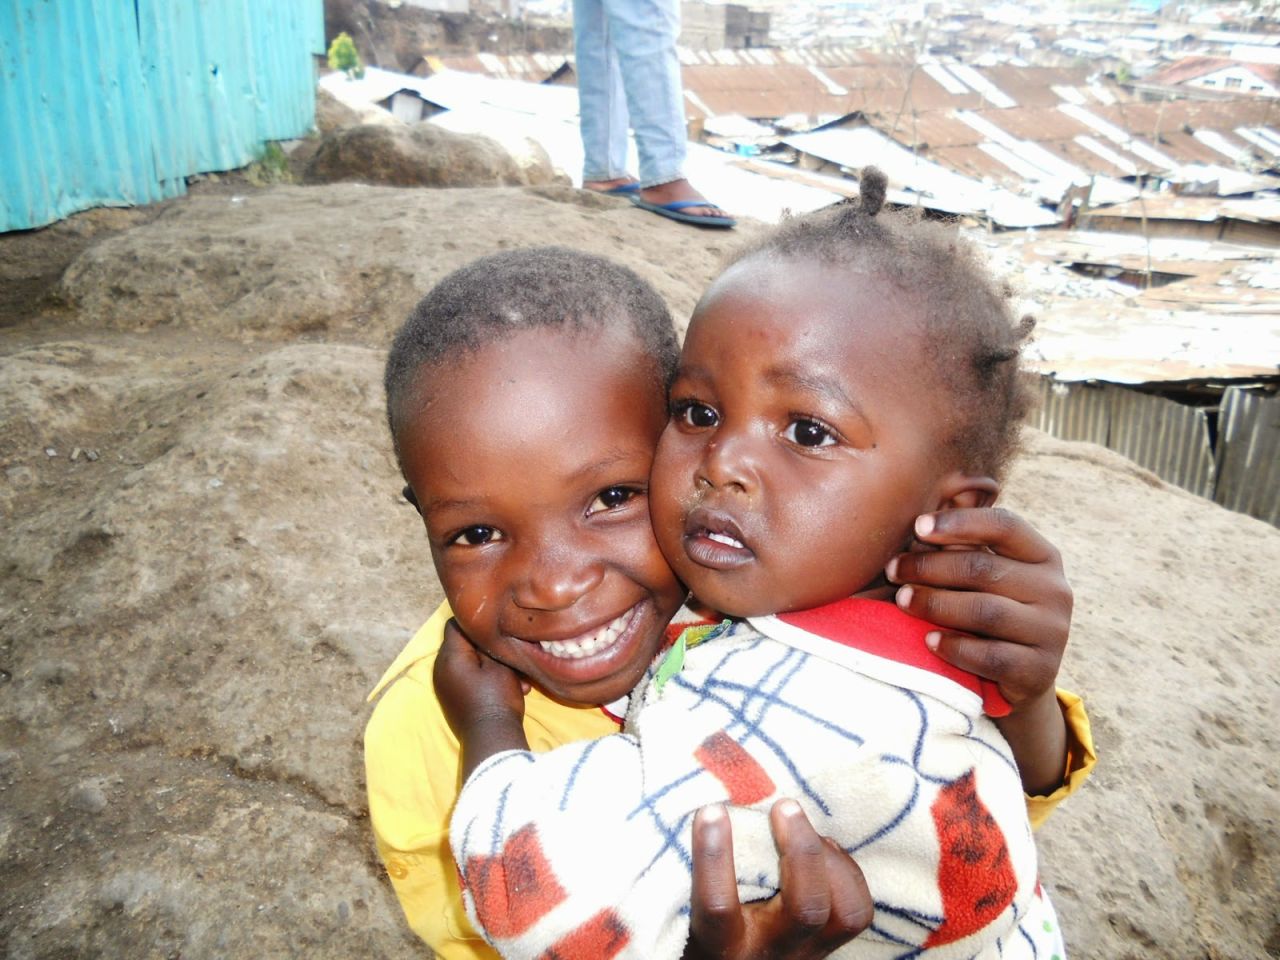 This photograph of two siblings clutching each other in an embrace shows that love endures in the slums, despite the other evident hardships. 